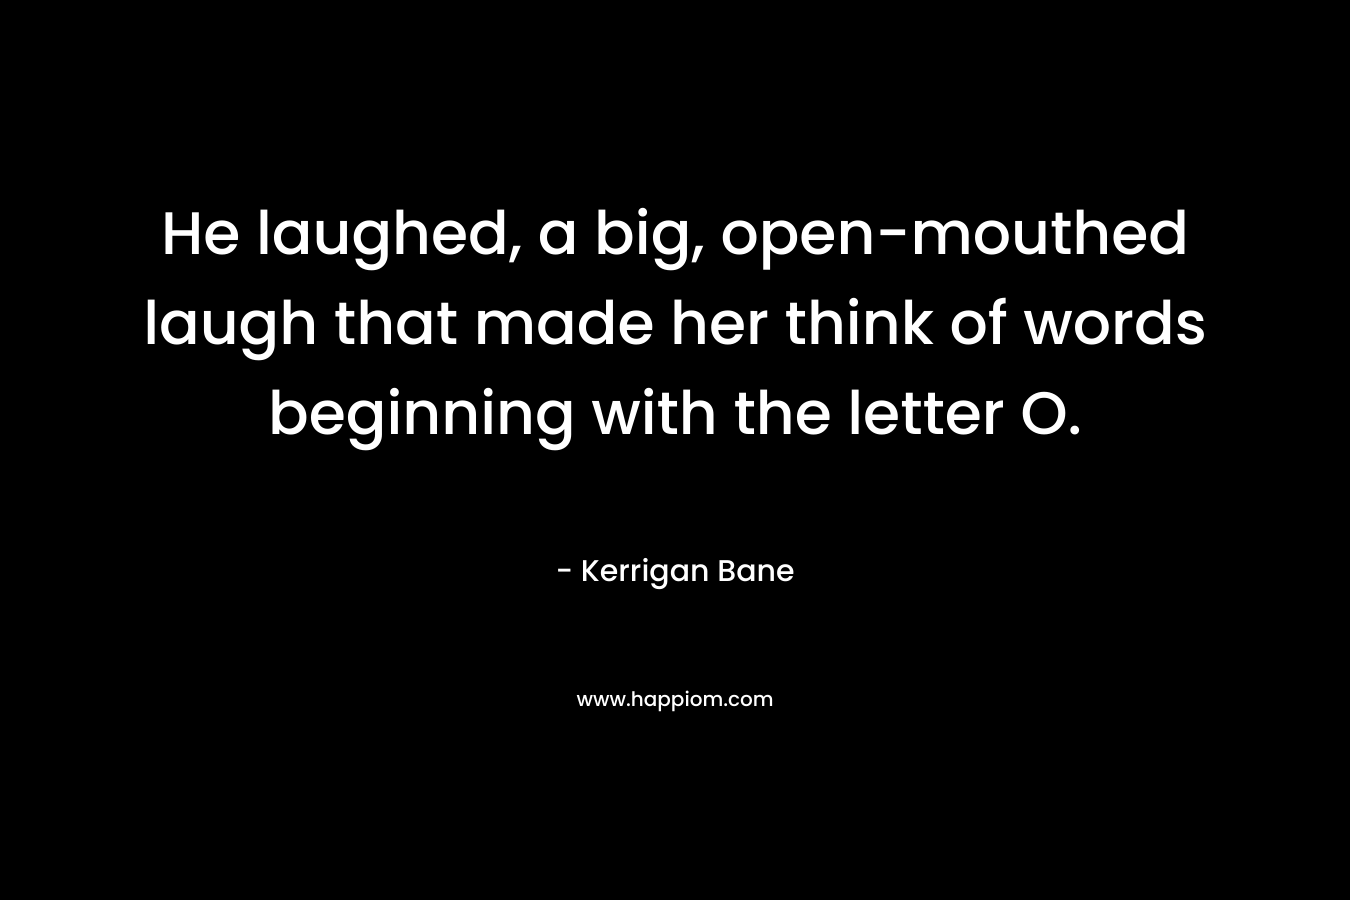 He laughed, a big, open-mouthed laugh that made her think of words beginning with the letter O.